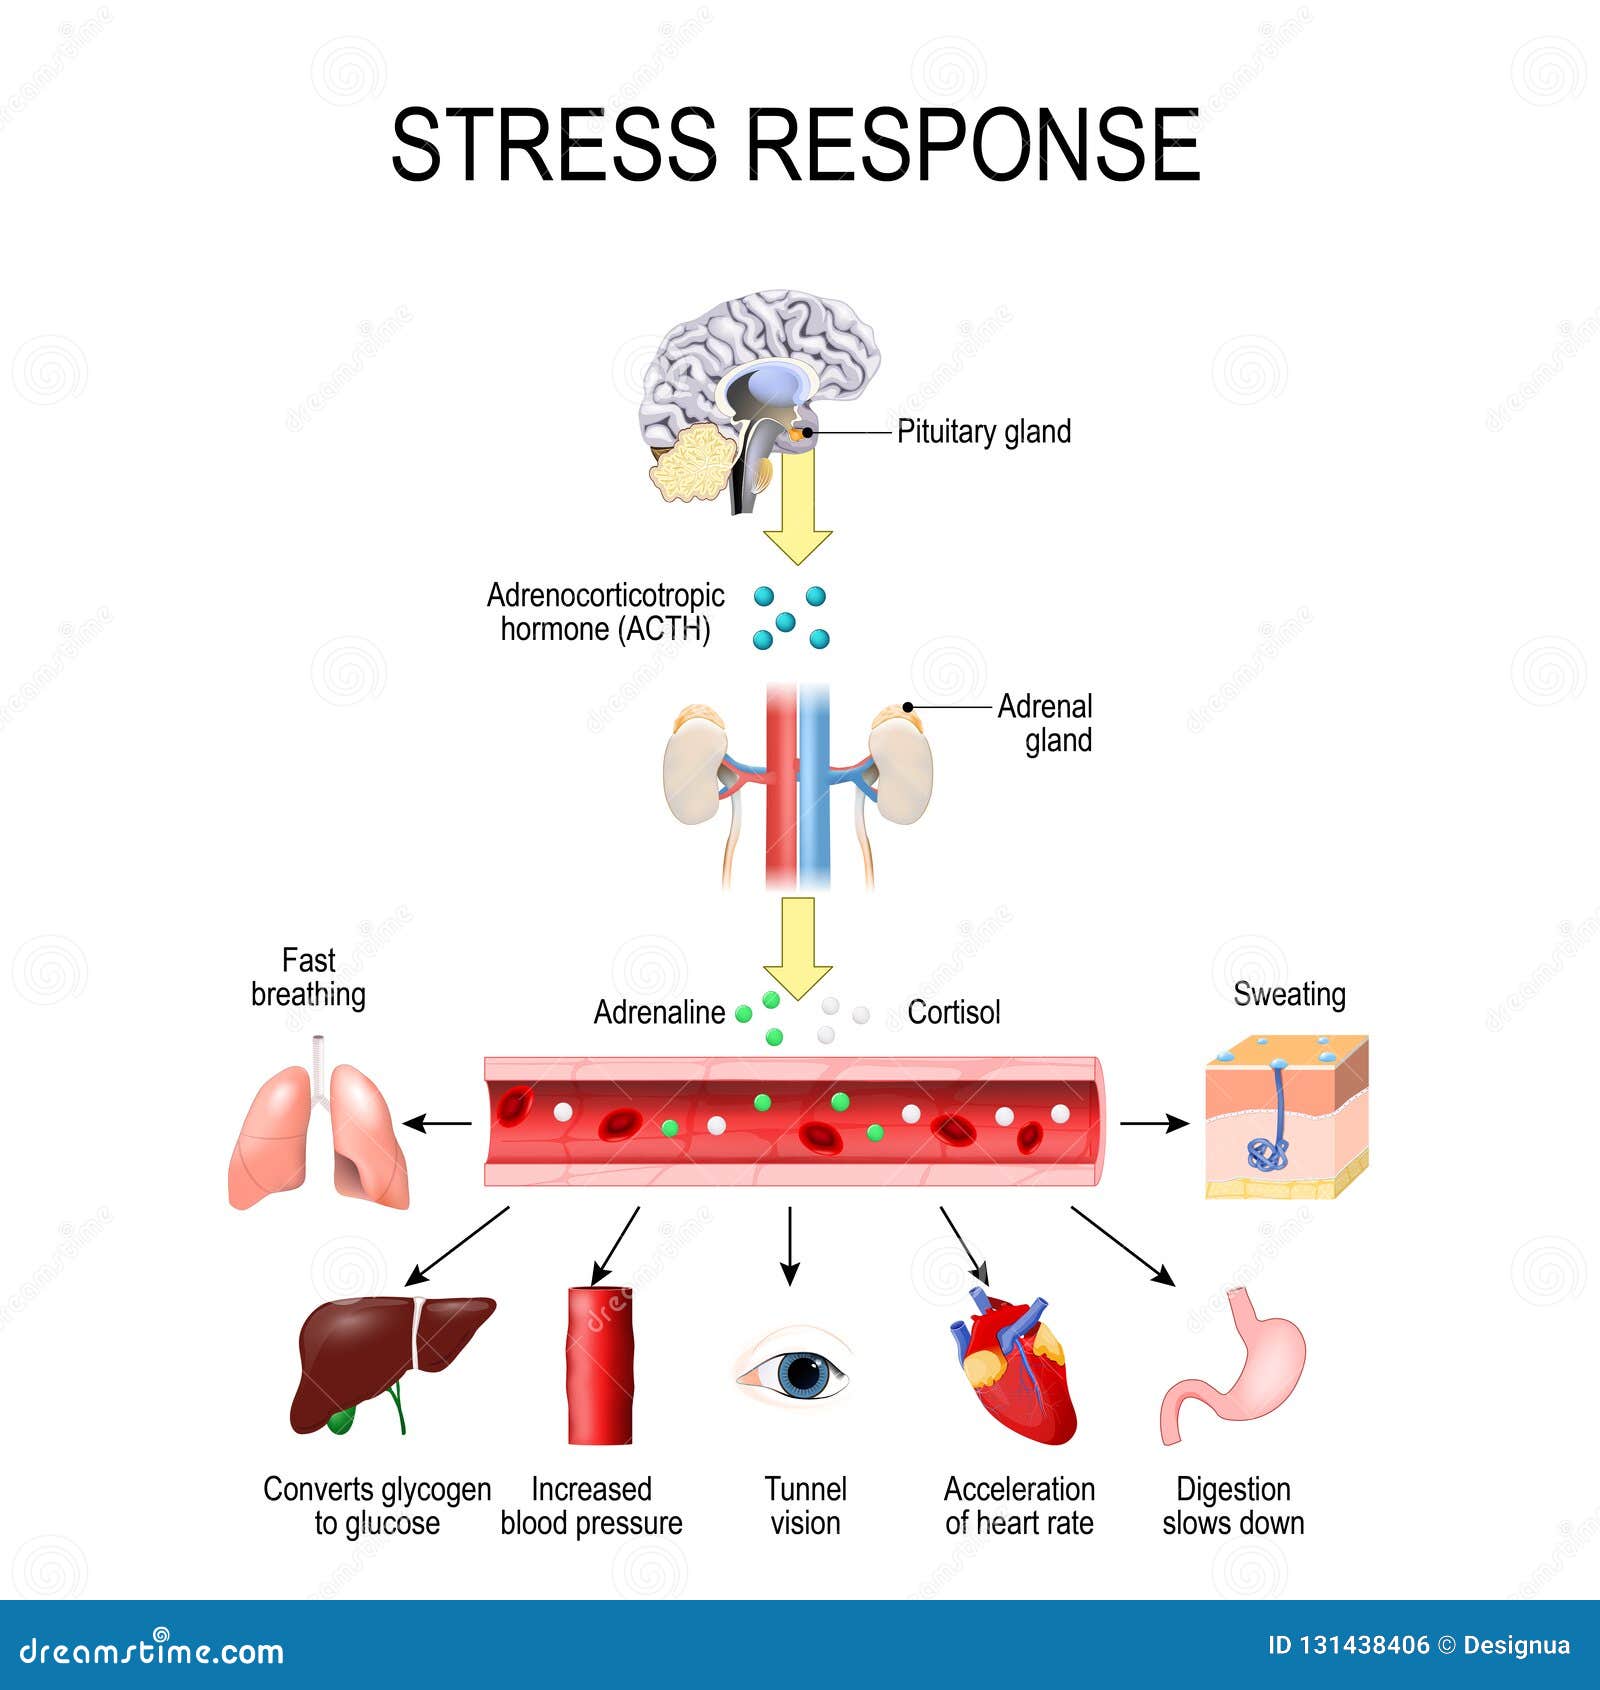 stress response. activation of the stress system. stress is a main cause of high levels of adrenaline and cortisol secretion.